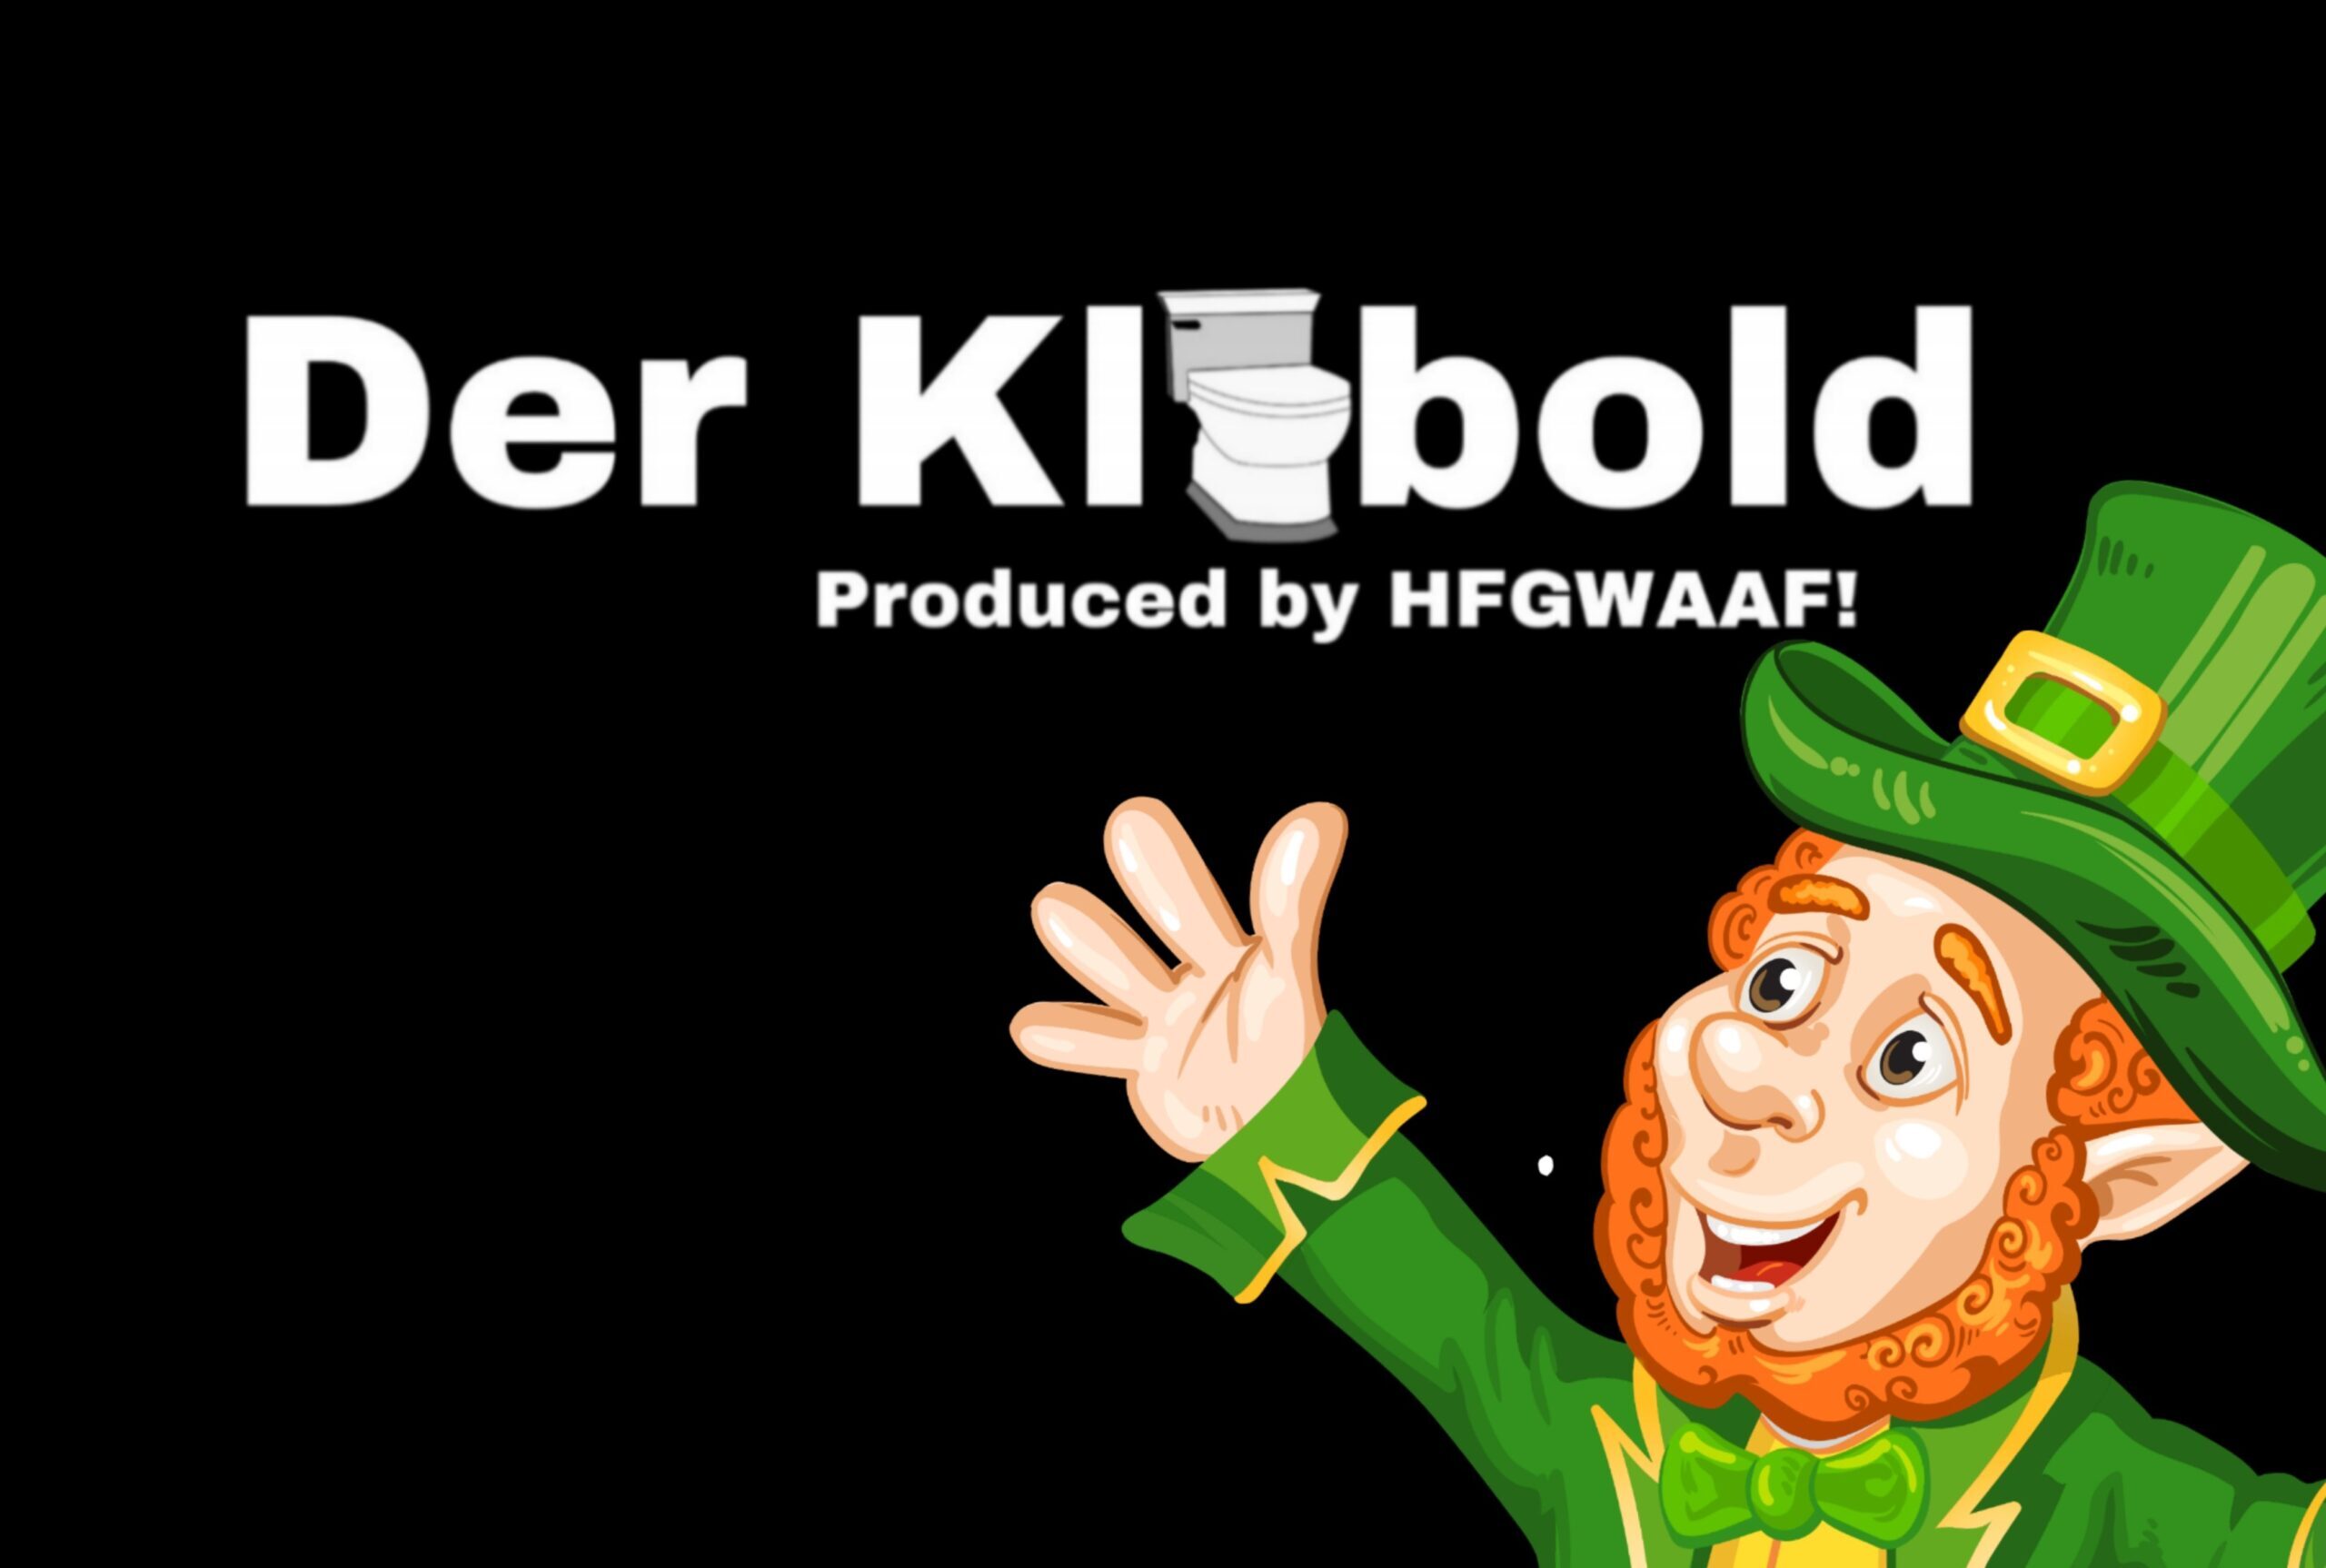 You are currently viewing Der Klobold Online